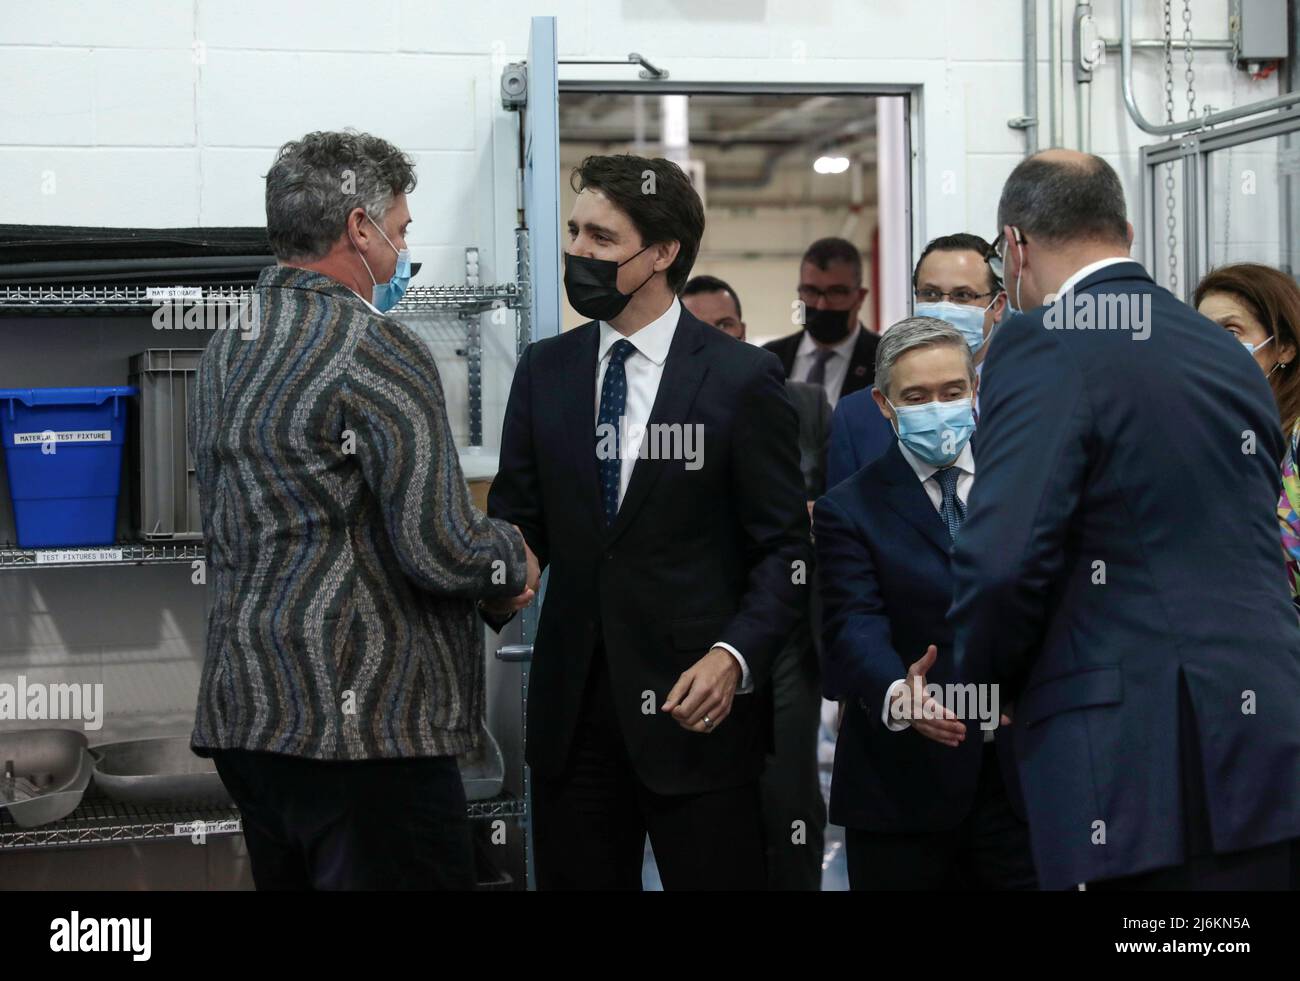 Canada's Prime Minister Justin Trudeau is greeted by  Stellantis COO for North America Mark Stewart at the Stellantis Research and Development Center in Windsor, Ontario, Canada May 2, 2022.  REUTERS/Rebecca Cook Stock Photo